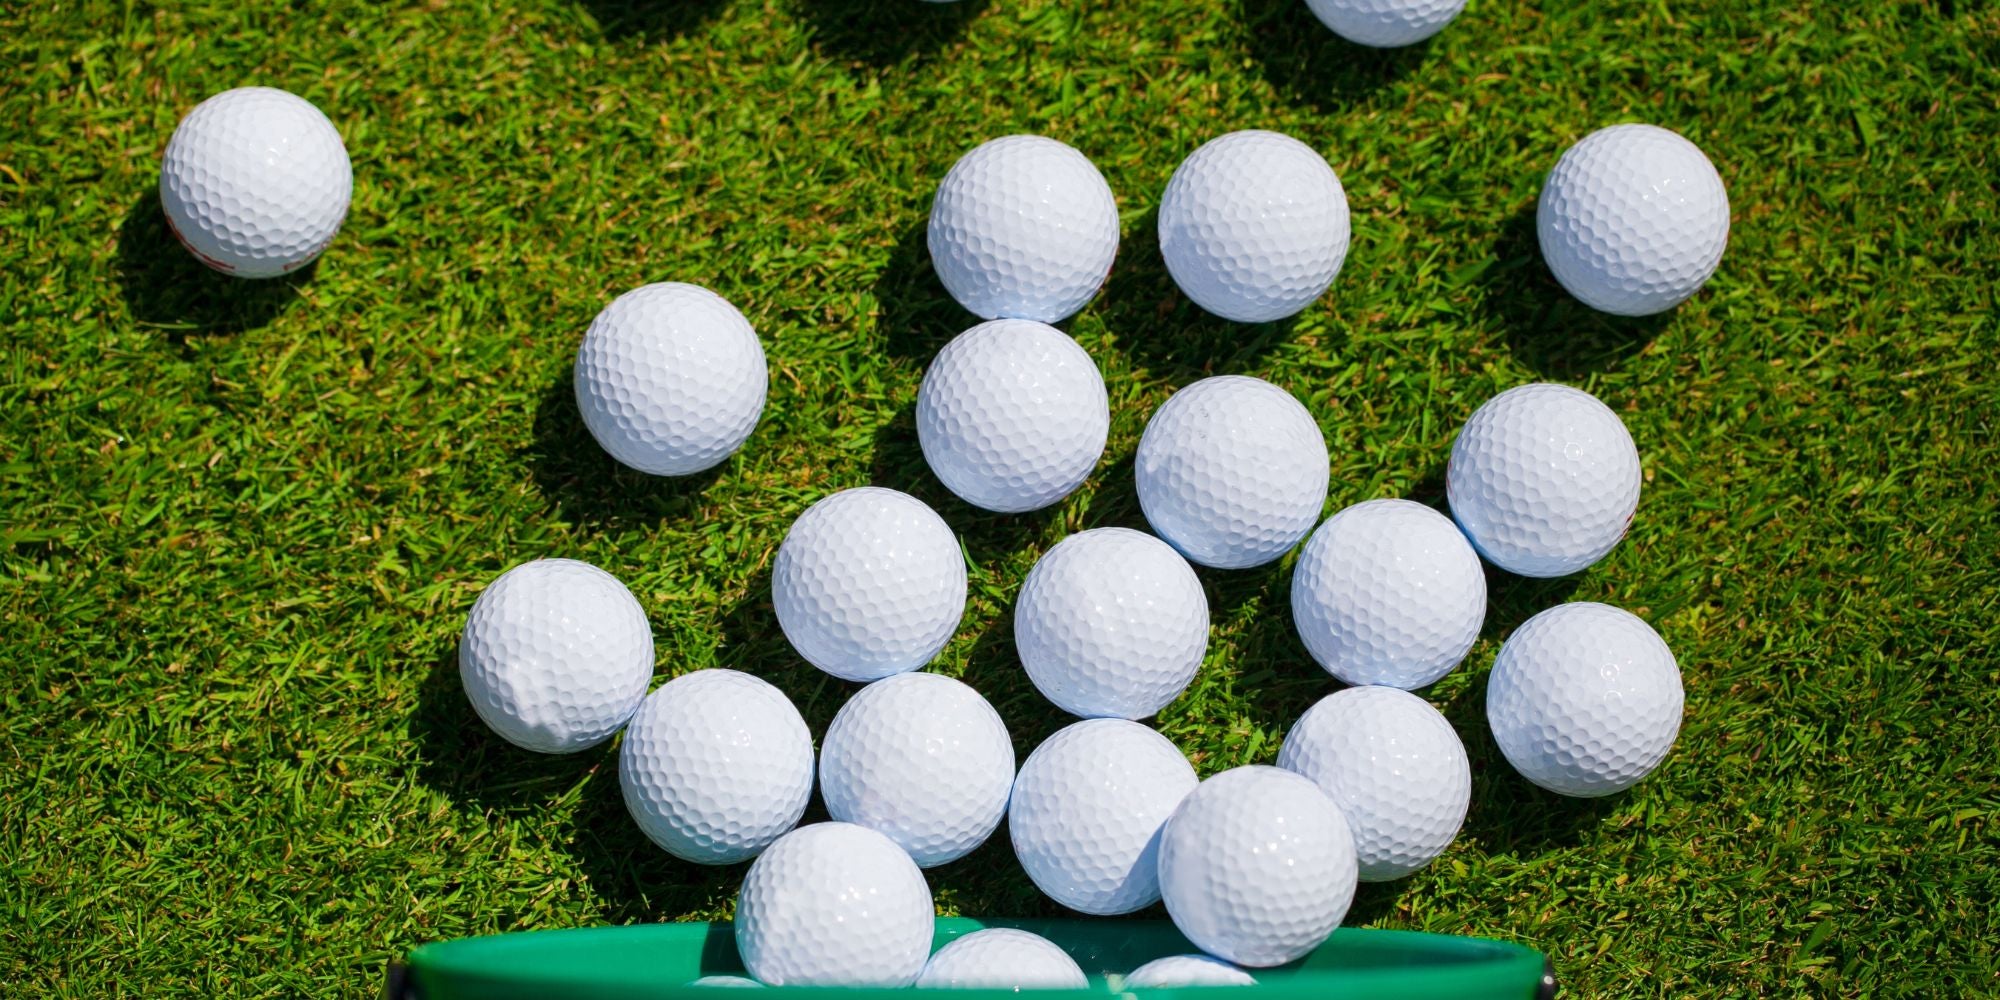 Golf Ball Selection Guide: Comparing Choices from the Major Manufacturers